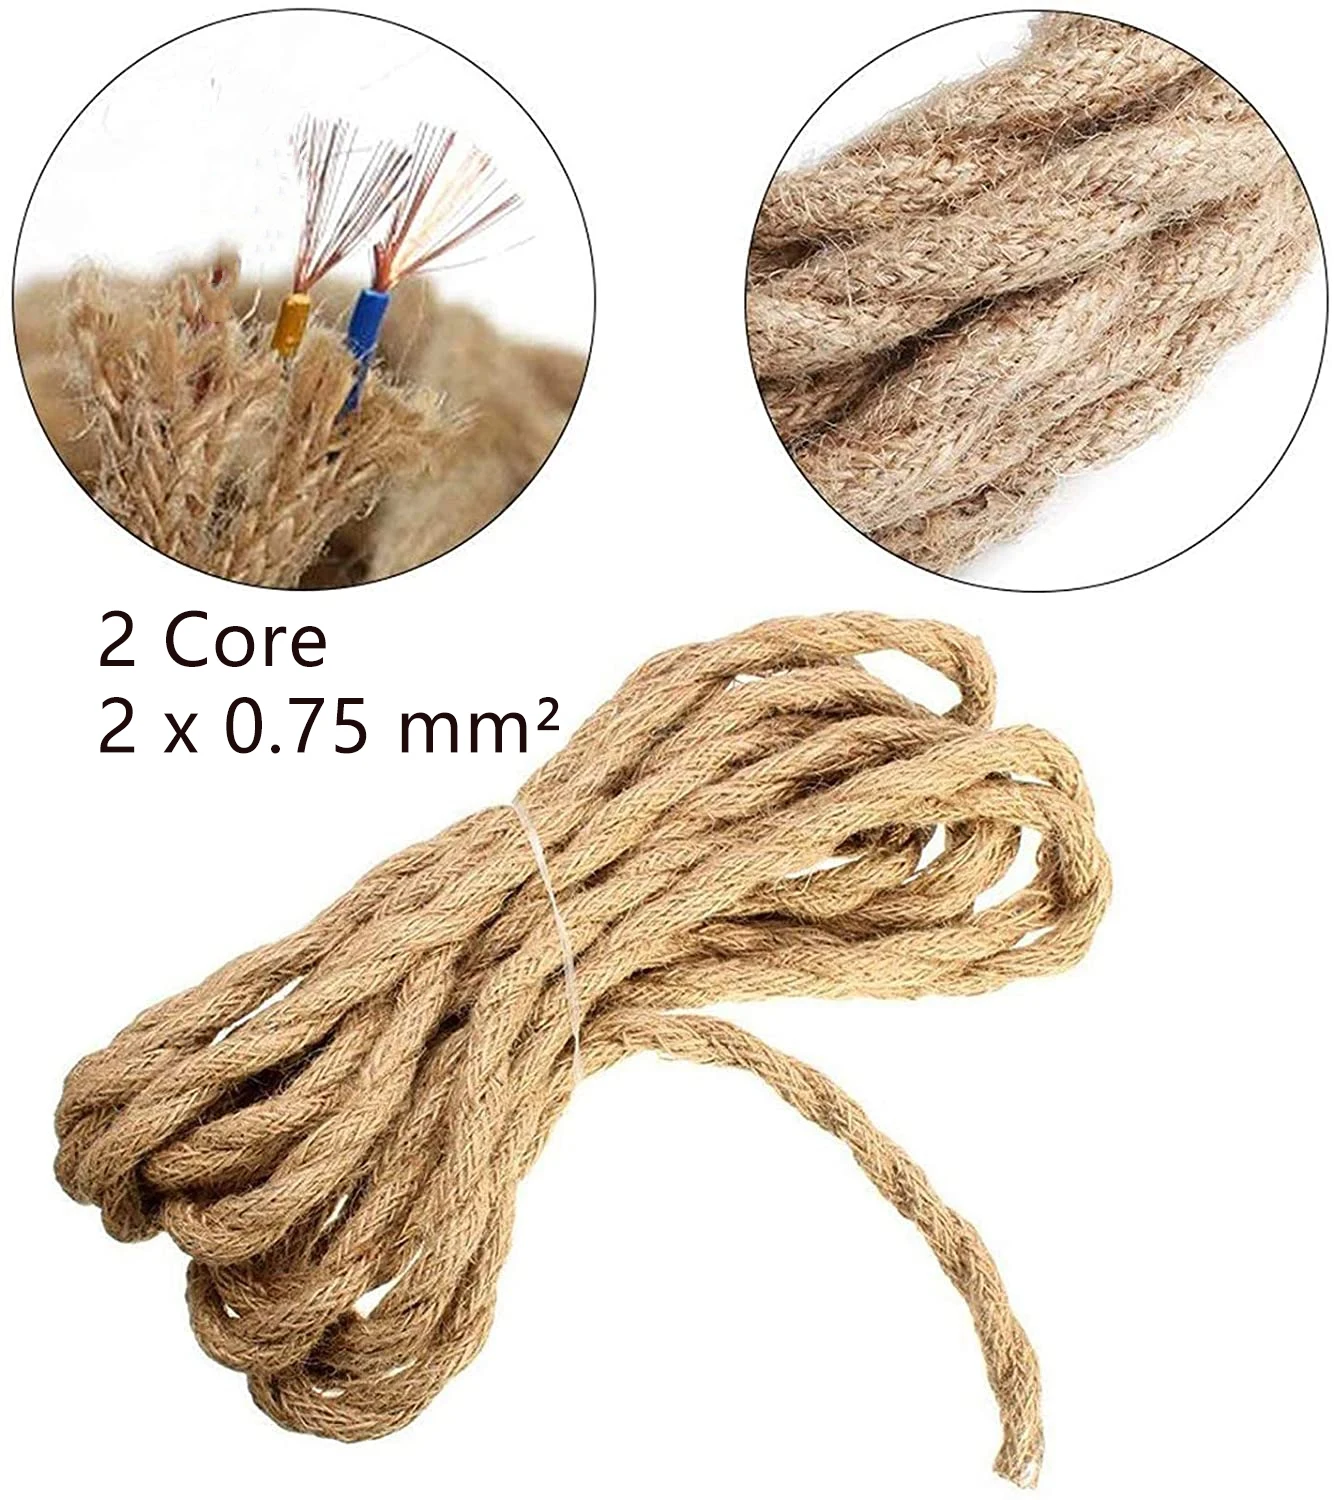 2 Core 3 Core 0.75 mm² Vintage Hemp Rope Wire Copper Electrical Twisted Flexible Cable Braided Edison Retro Pendant Light Cords usb c power adapter Electrical Equipment & Supplies